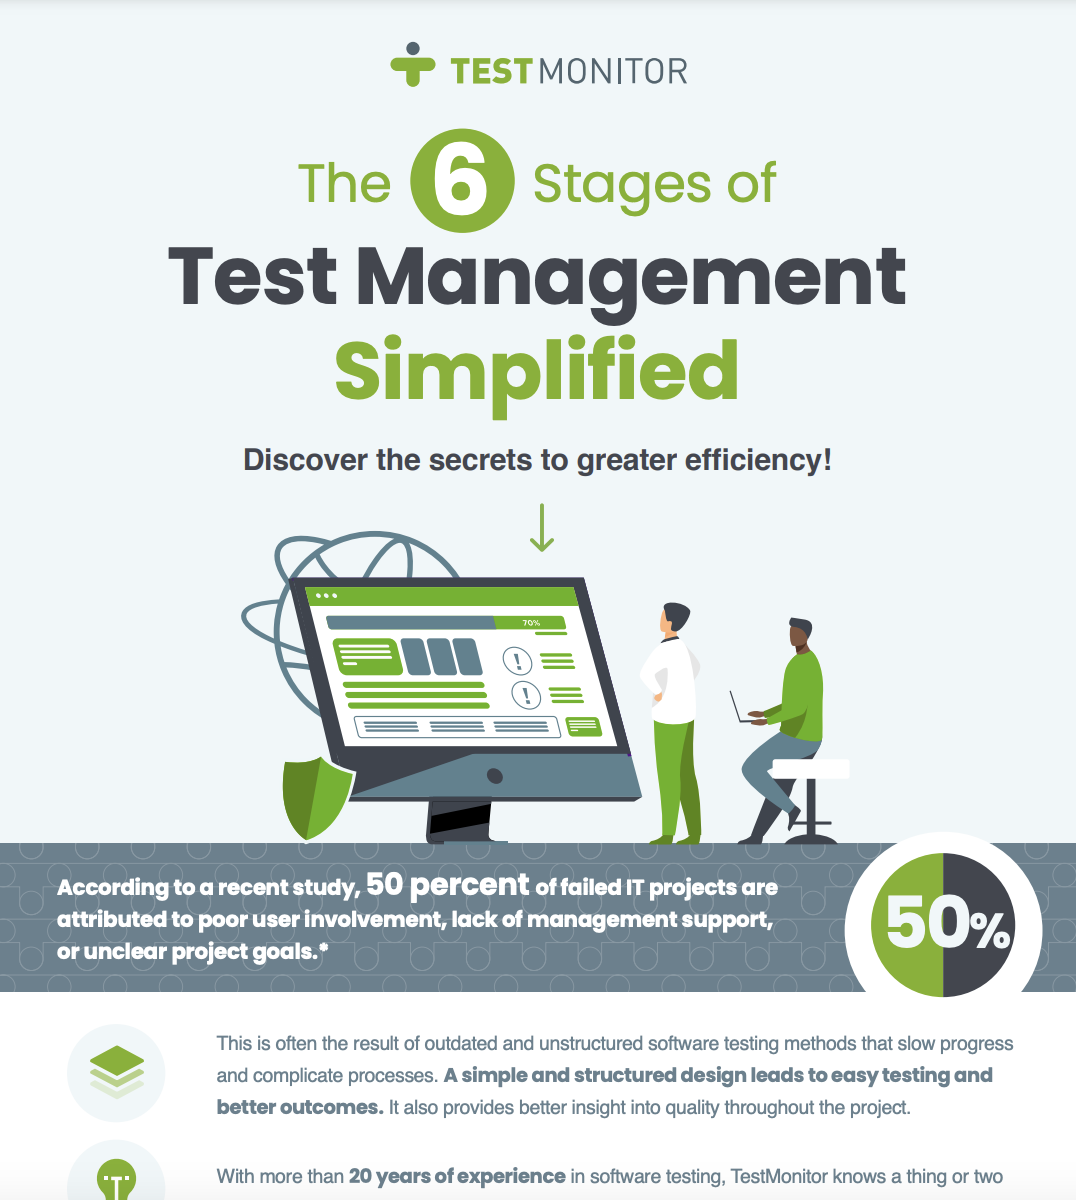 The 6 Stages of Test Management Simplified